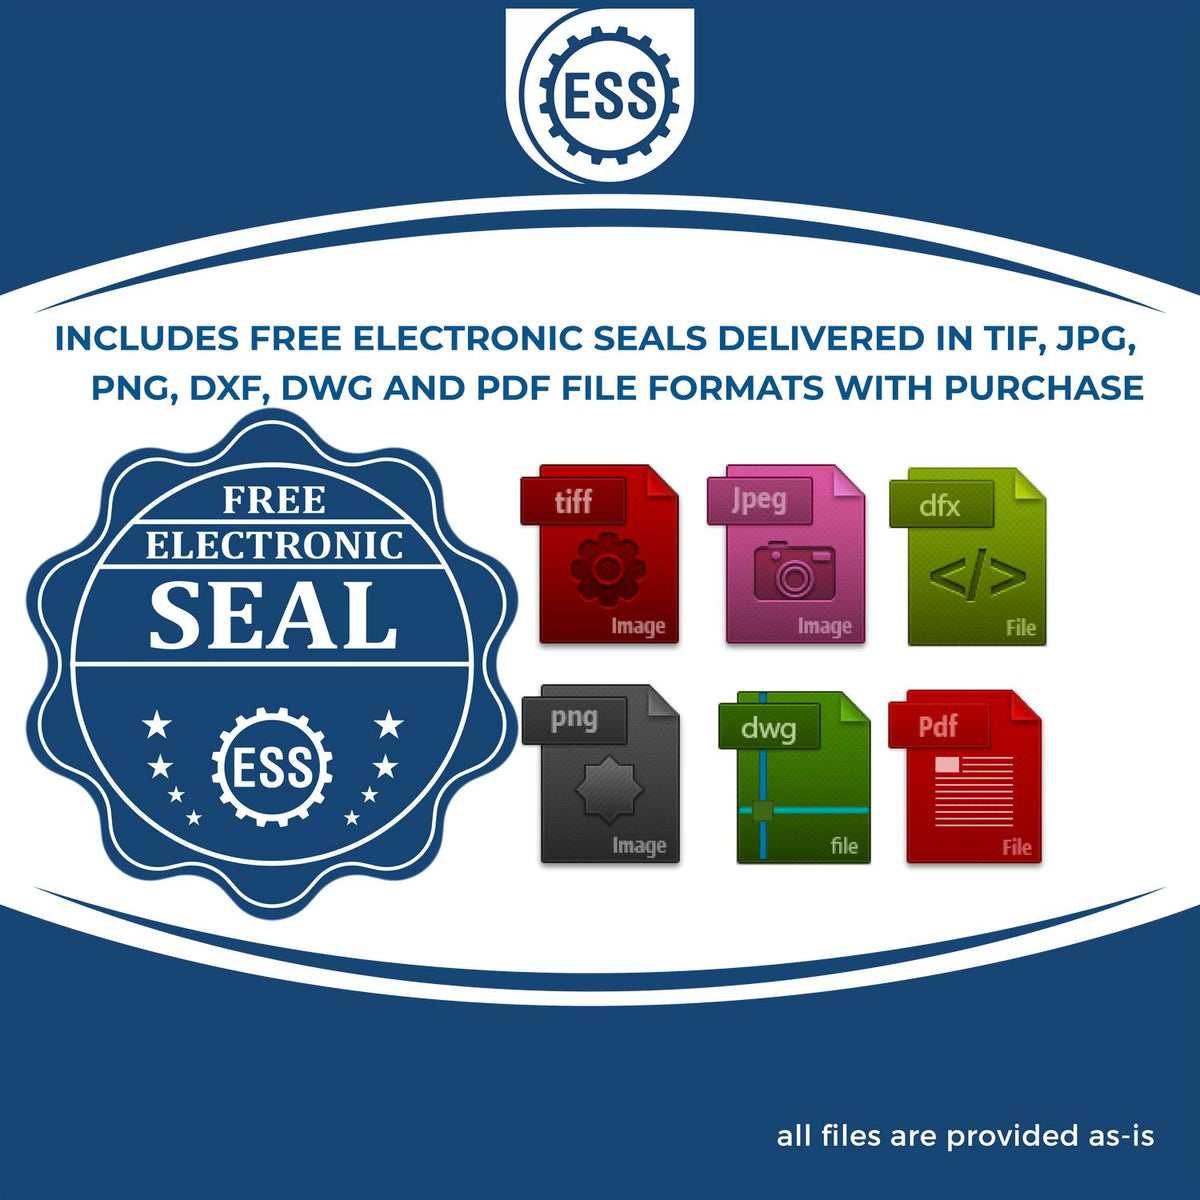 An infographic for the free electronic seal for the MaxLight Premium Pre-Inked Maryland Rectangular Notarial Stamp illustrating the different file type icons such as DXF, DWG, TIF, JPG and PNG.